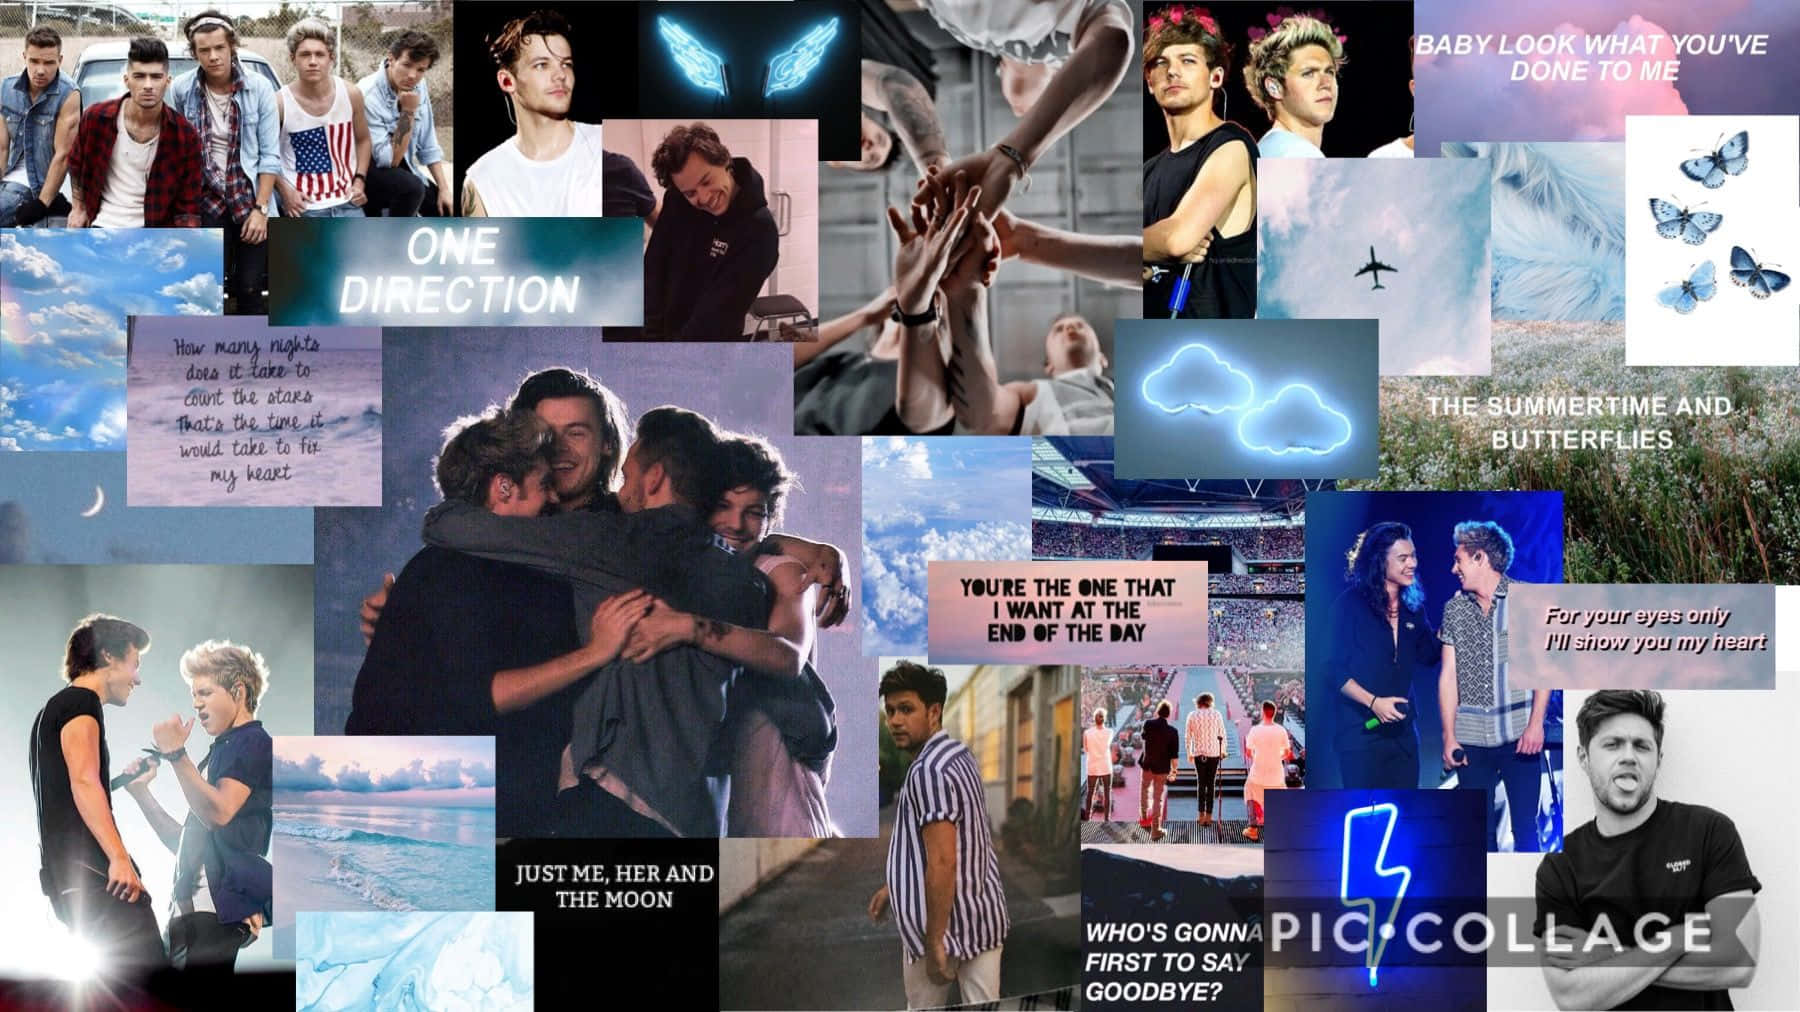 "One Direction laptop - stay connected with the band you love" Wallpaper